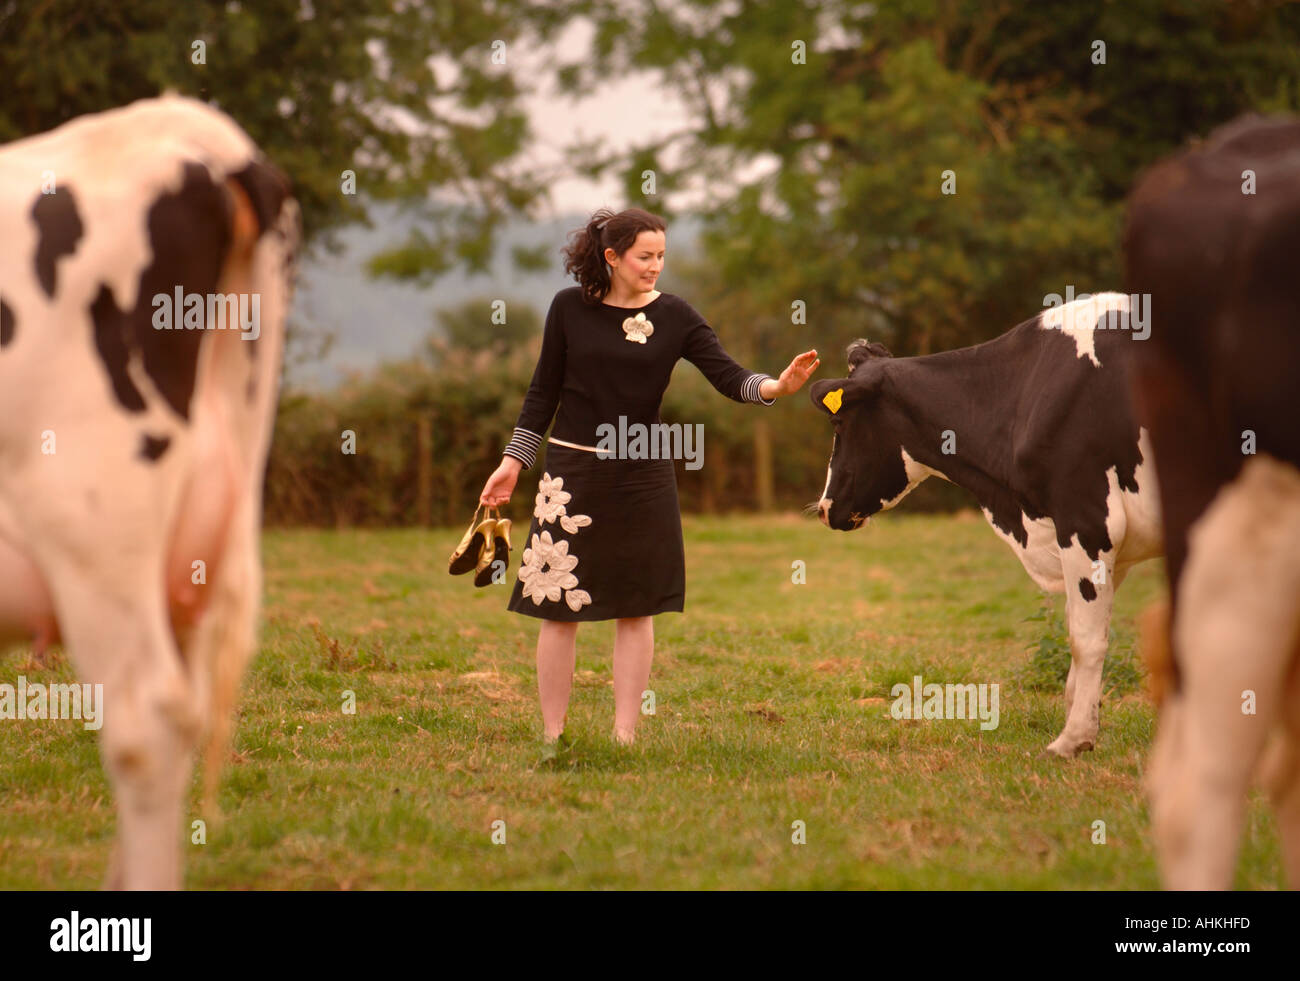 A WELL DRESSED LADY WITH HIGH HEELS IN A FIELD OF COWS Stock Photo